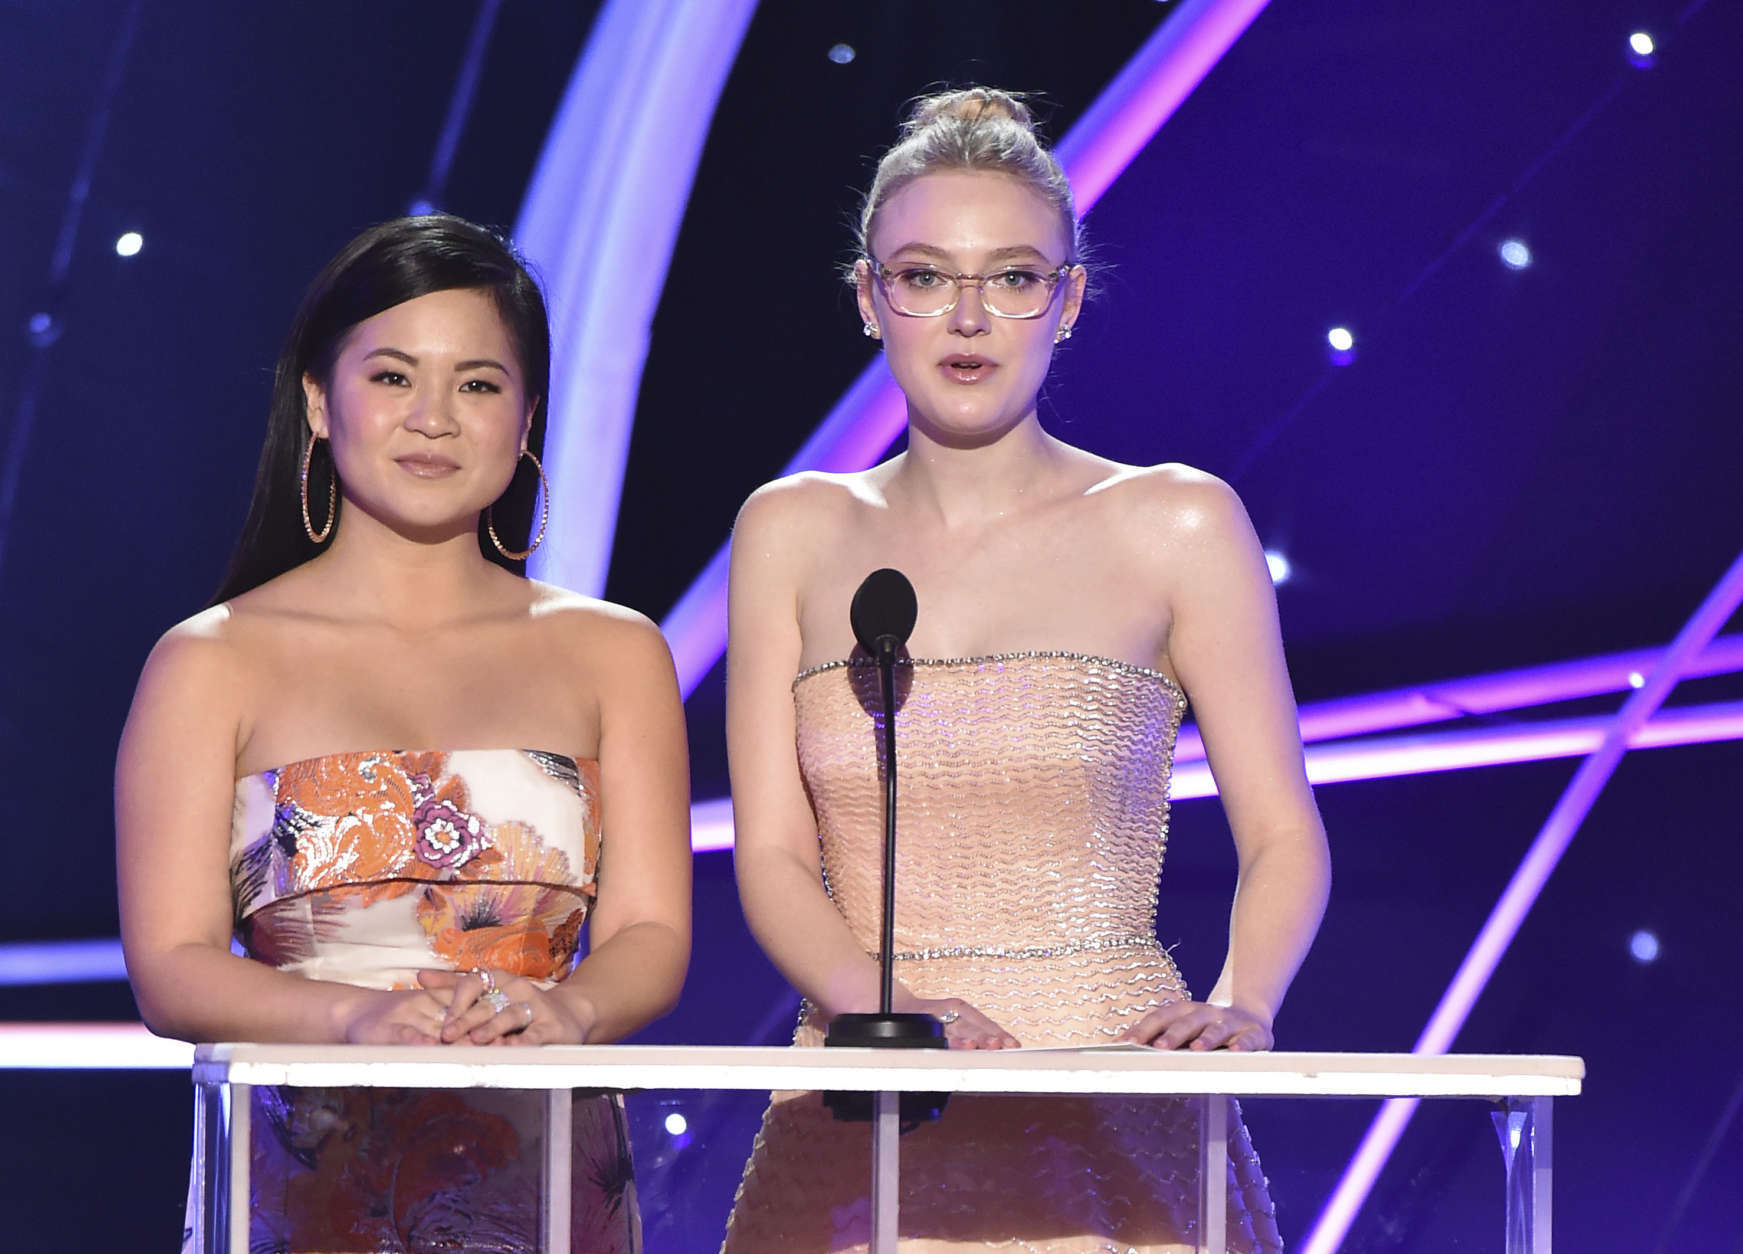 Kelly Marie Tran, left, and Dakota Fanning present the award for outstanding performance by a female actor in a drama series at the 24th annual Screen Actors Guild Awards at the Shrine Auditorium &amp; Expo Hall on Sunday, Jan. 21, 2018, in Los Angeles. (Photo by Vince Bucci/Invision/AP)